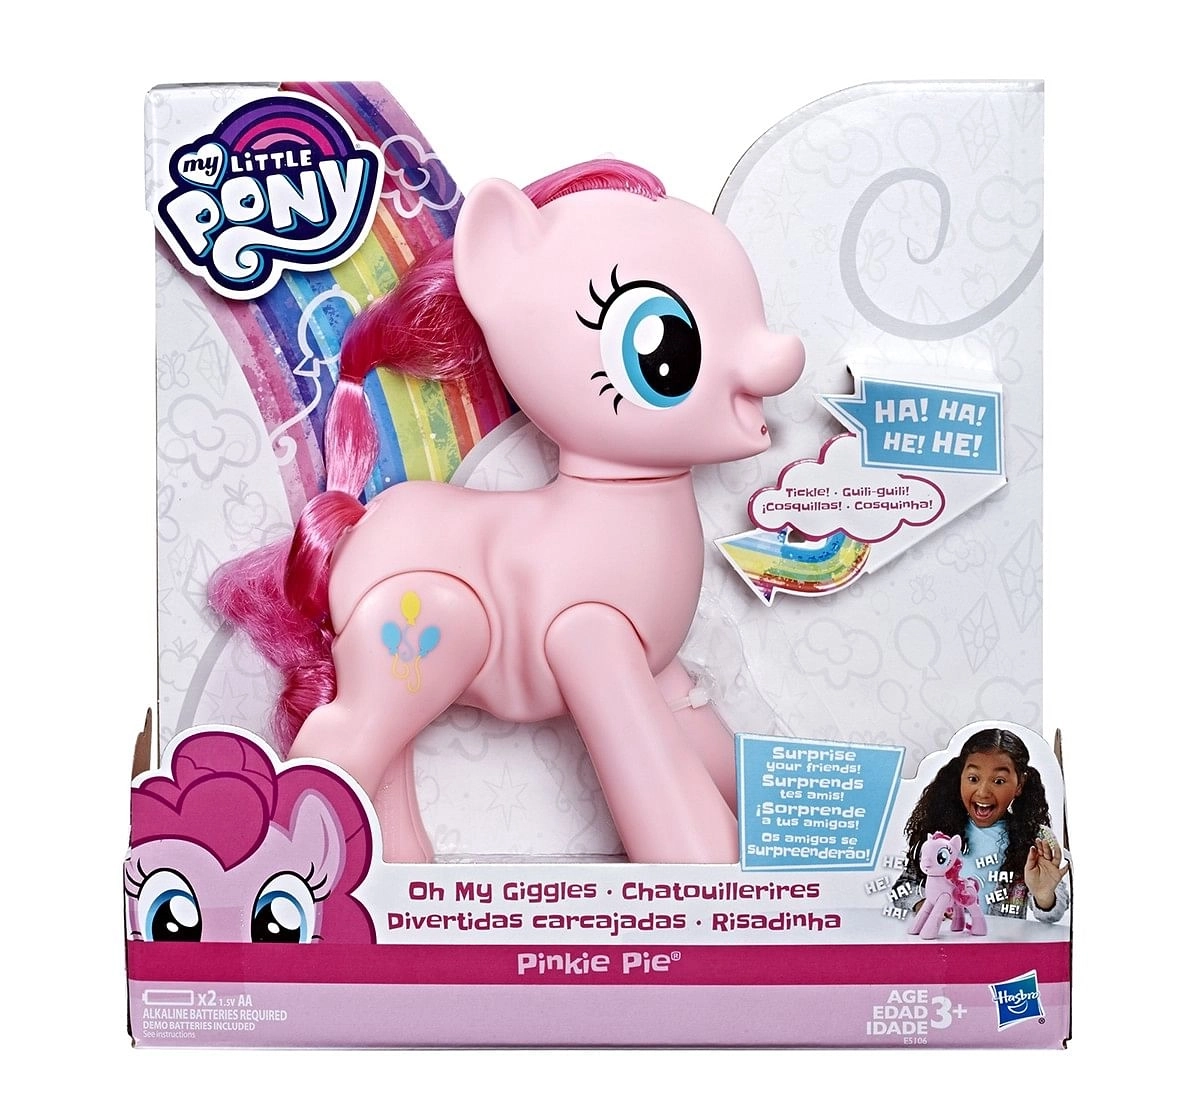 My Little Pony Toy Oh My Giggles Pinkie Pie -8-Inch Interactive Toy With Sounds And Movement Collectible Dolls for age 3Y+ 